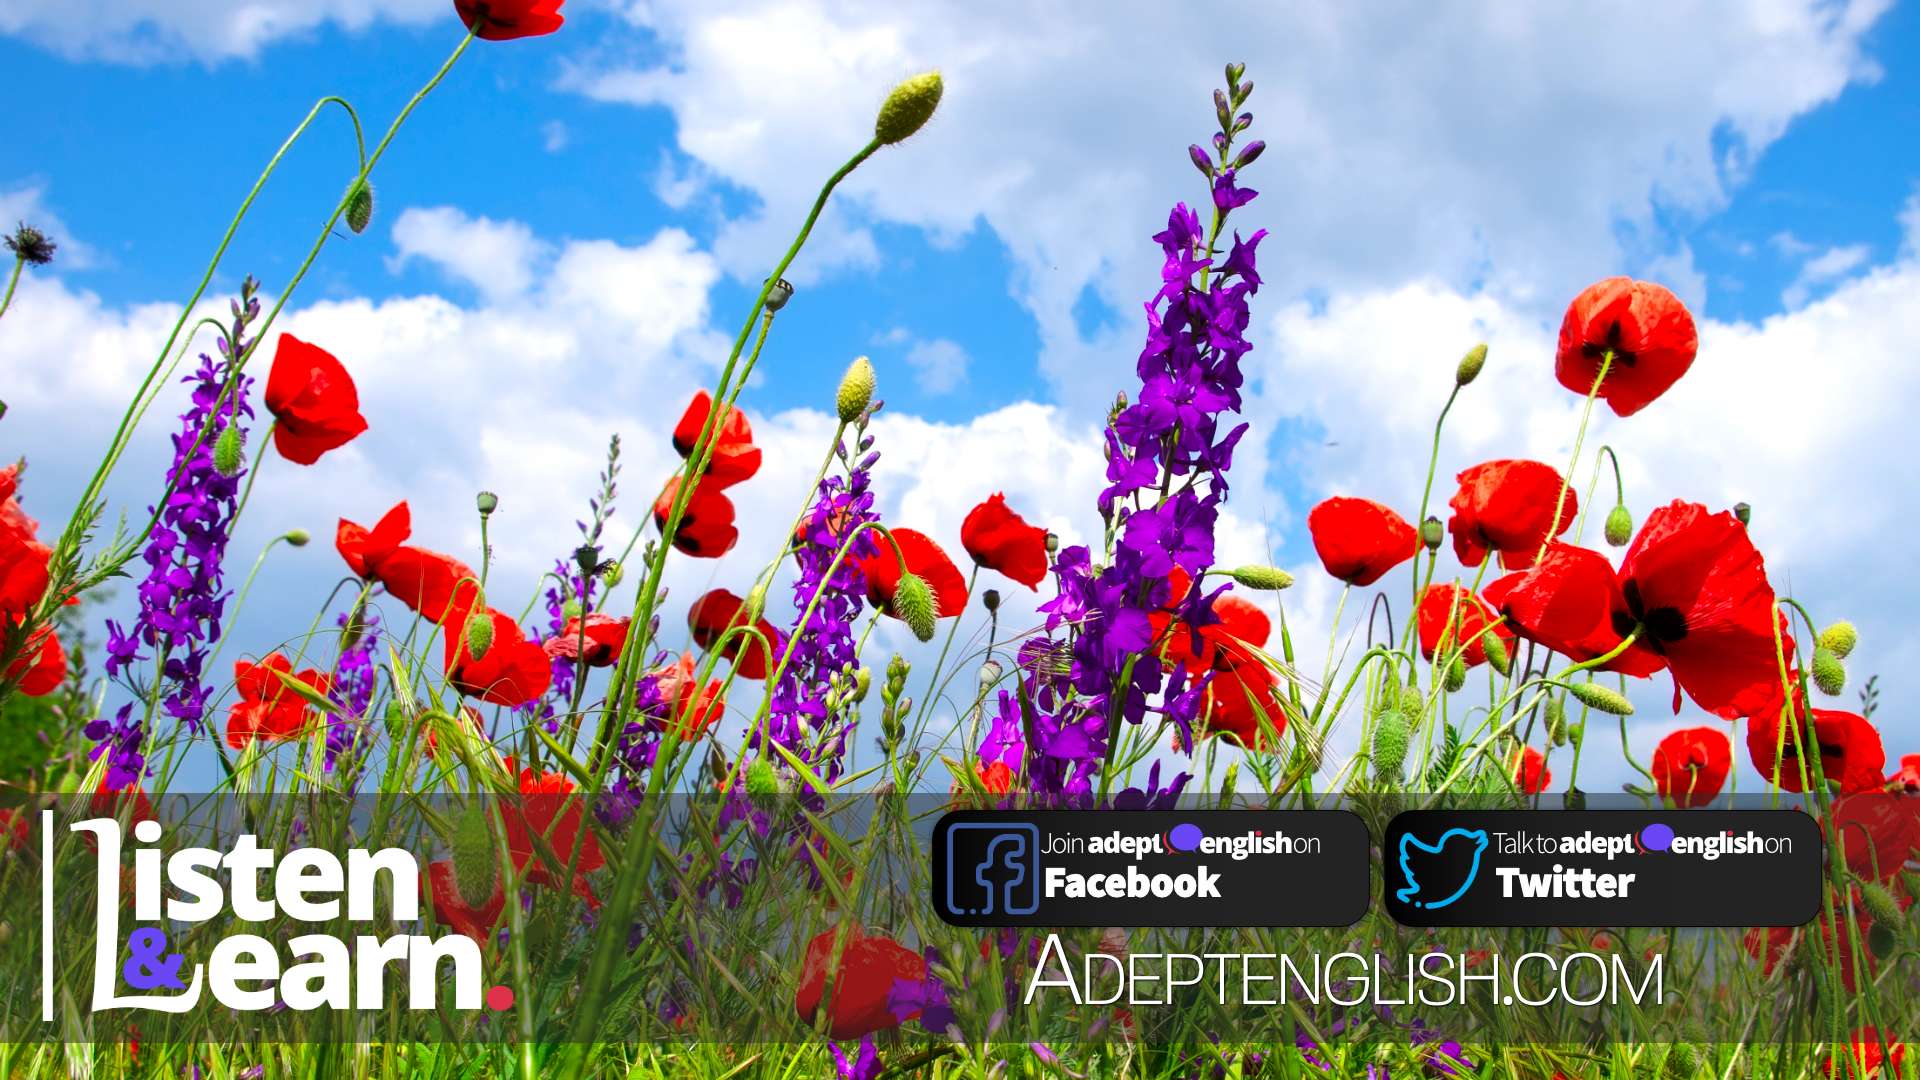 A photograph of brightly coloured wild flowers set against a deep blue sky used as the cover image for learning to speak English language